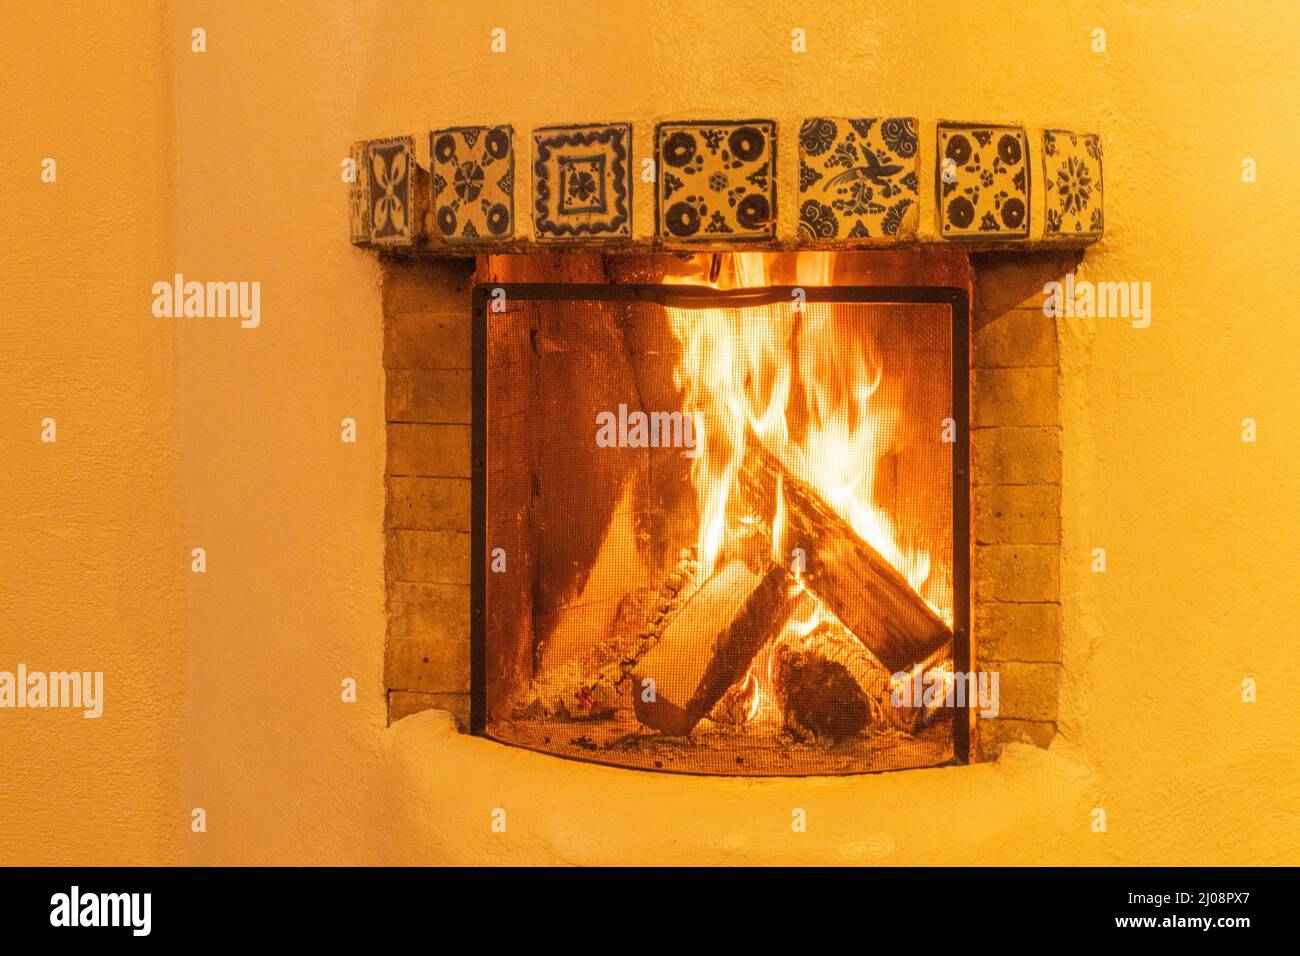 kiva style fireplace burning logs common in homes in the southwestern United States with the adobe walls radiating heat and provide cozy warmth Stock Photo